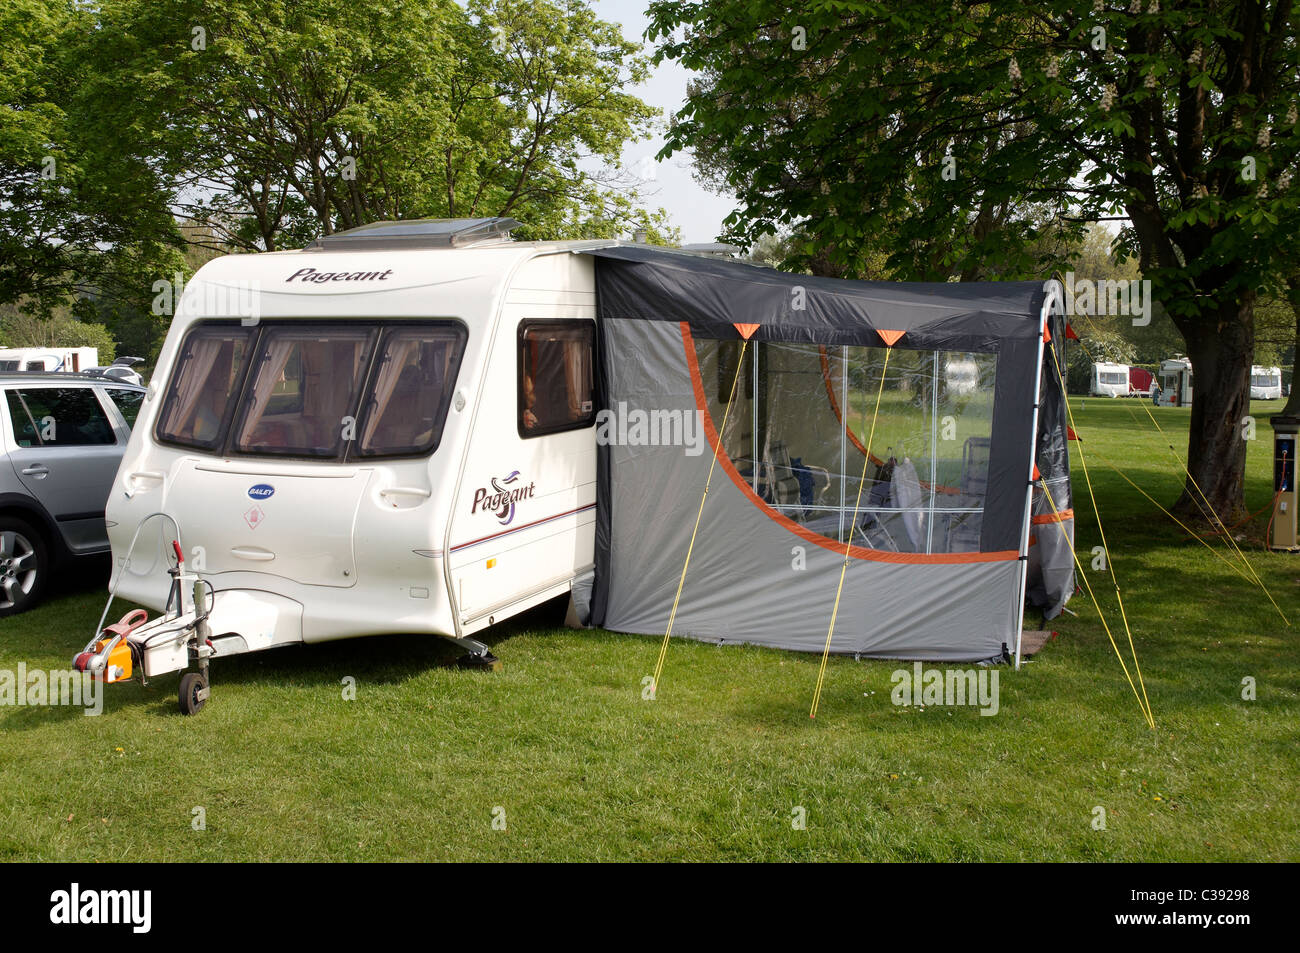 Bailey Pageant Series 3 Caravan With Lightweight Awning On A Grass Pitch At Blackmore Caravan Club Site Stock Photo Alamy